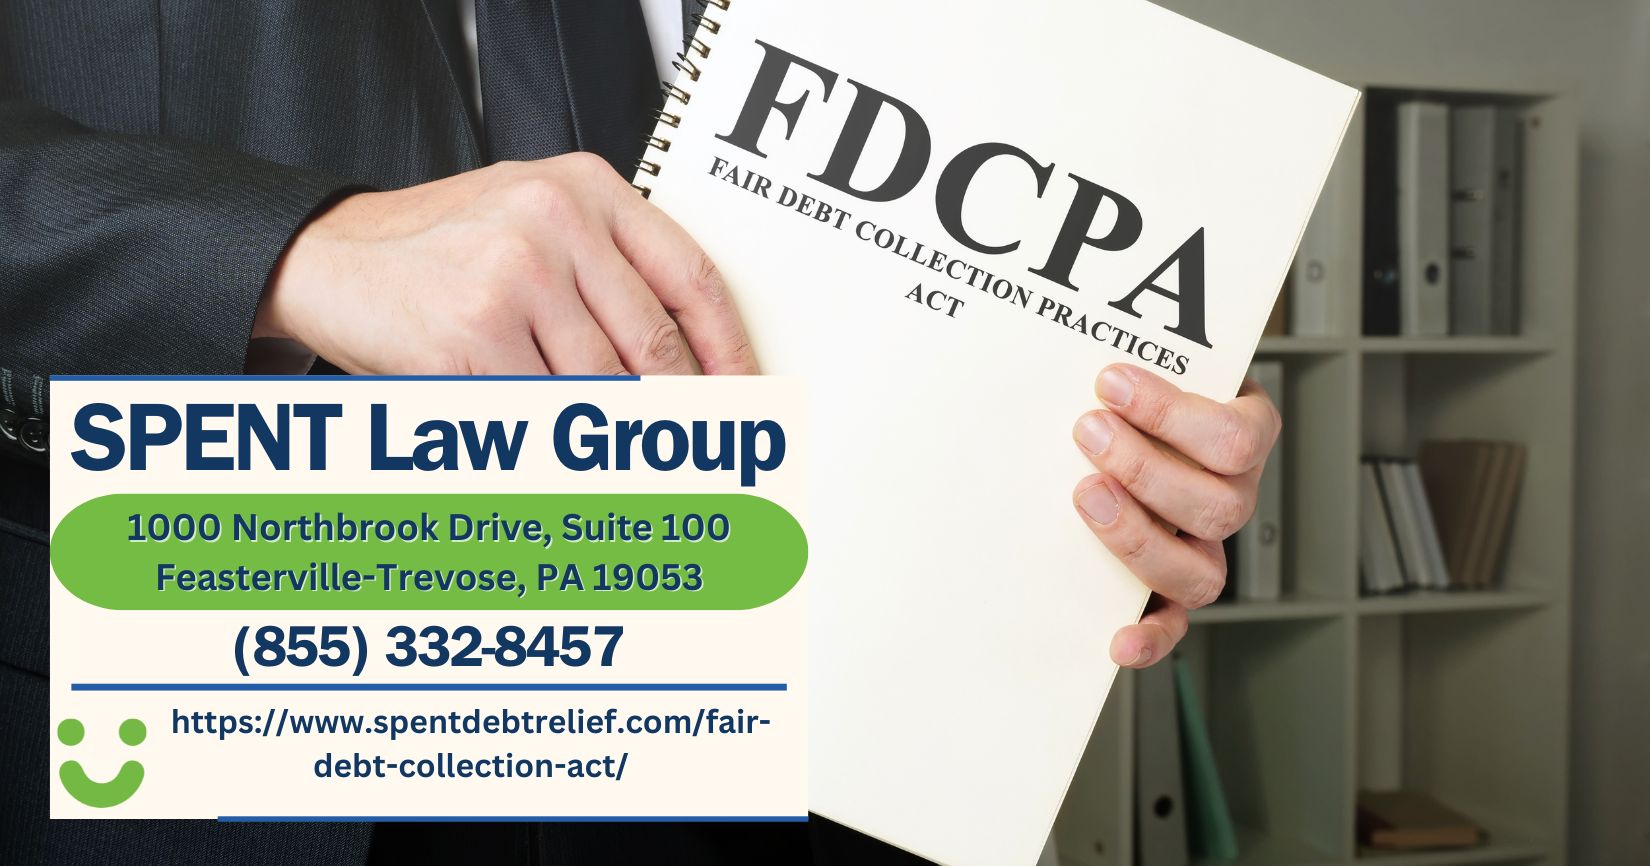 SPENT Law Group’s Debt Settlement Attorneys Release Comprehensive Guide on the Fair Debt Collection Practices Act